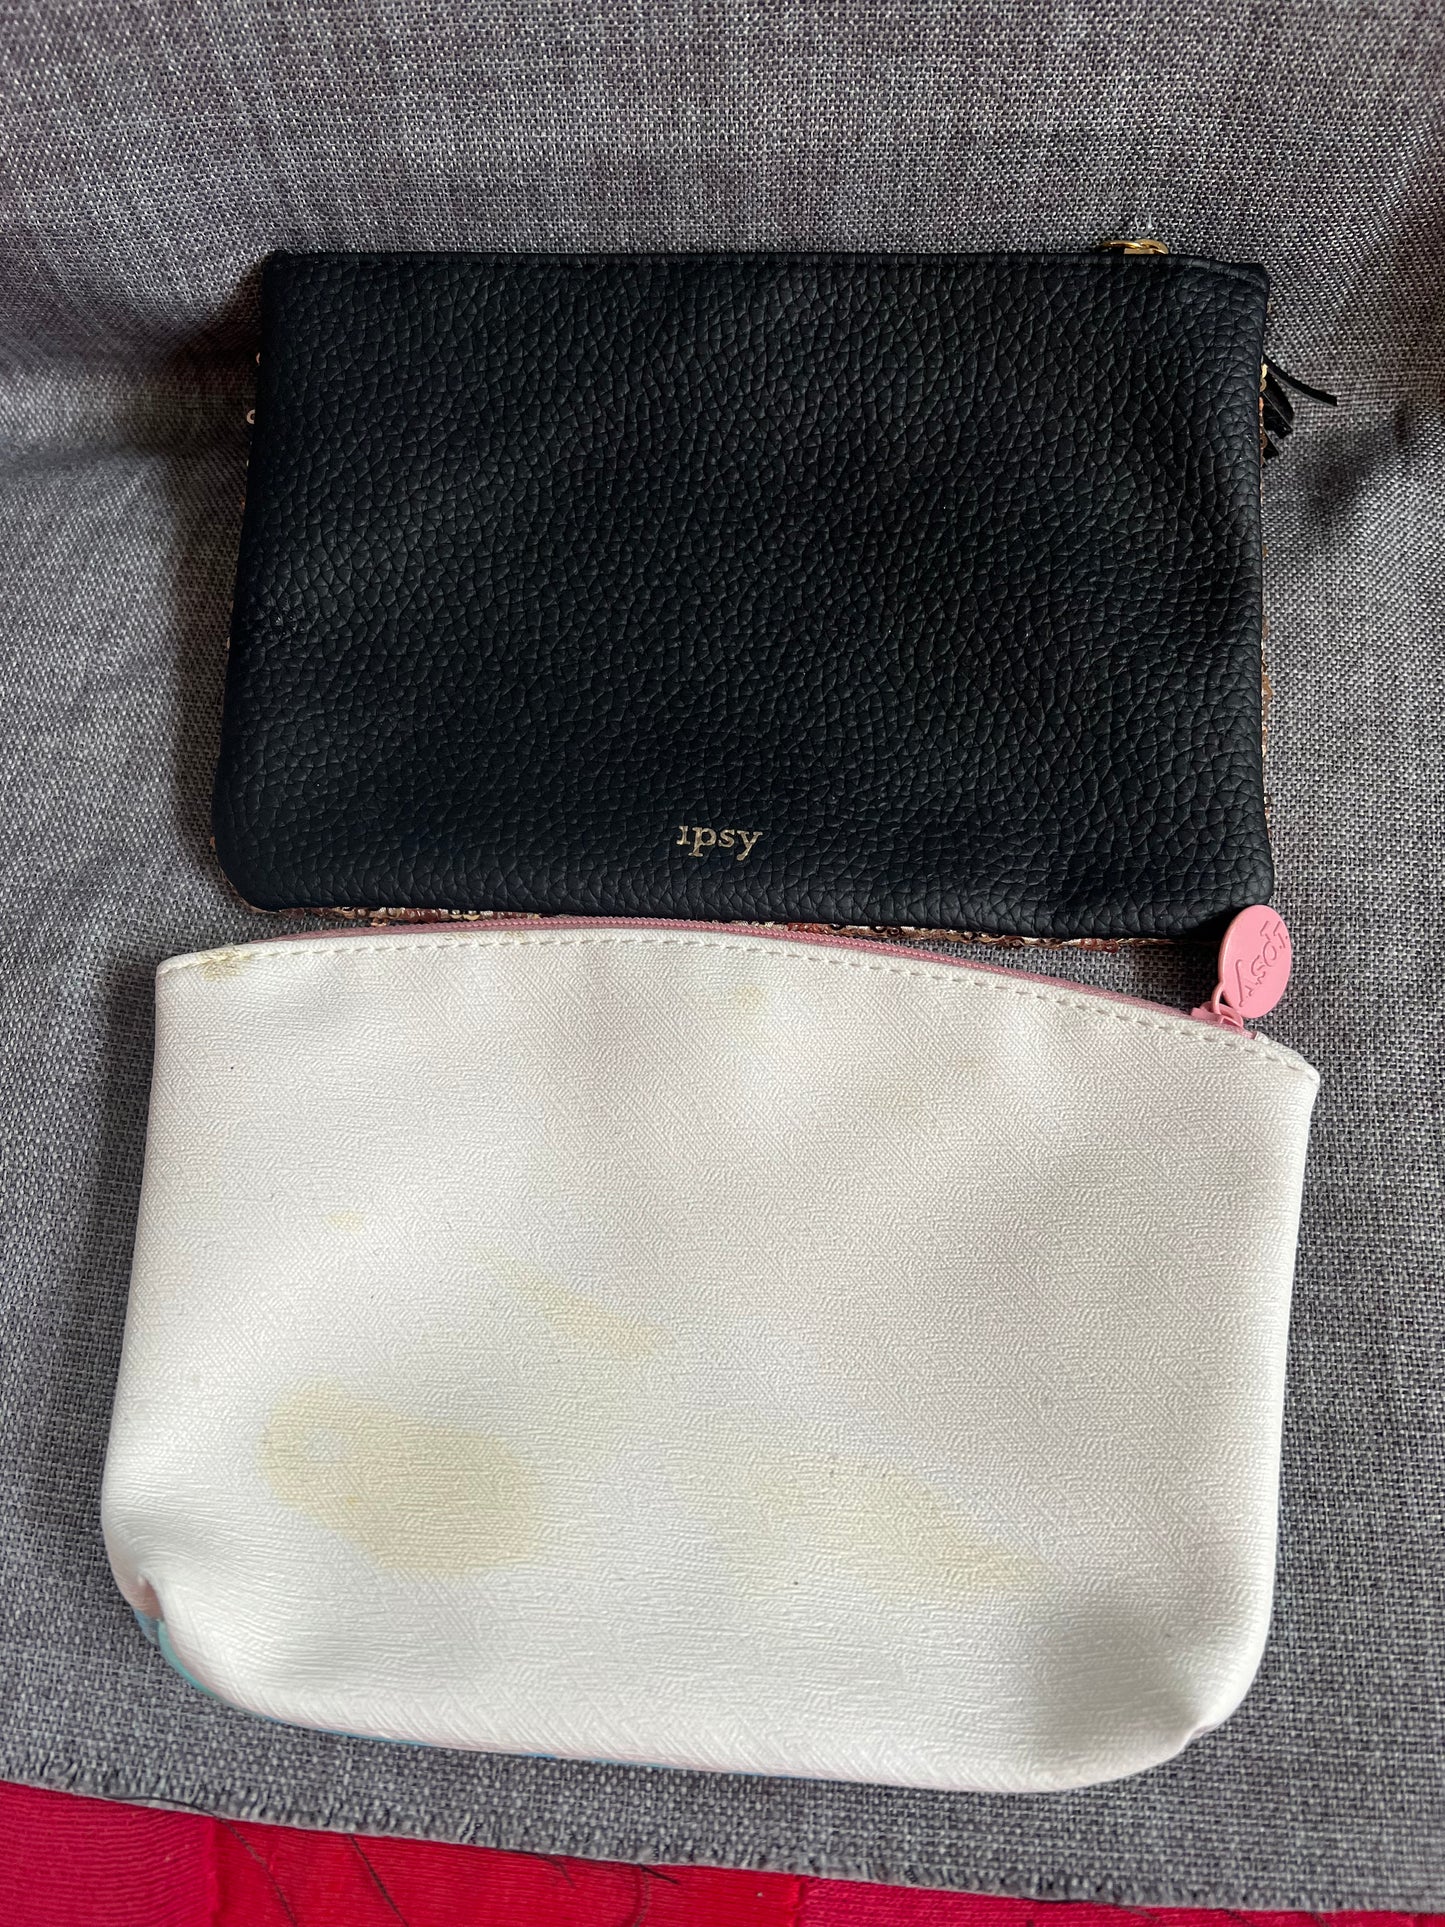 Two Ipsy Makeup Bags